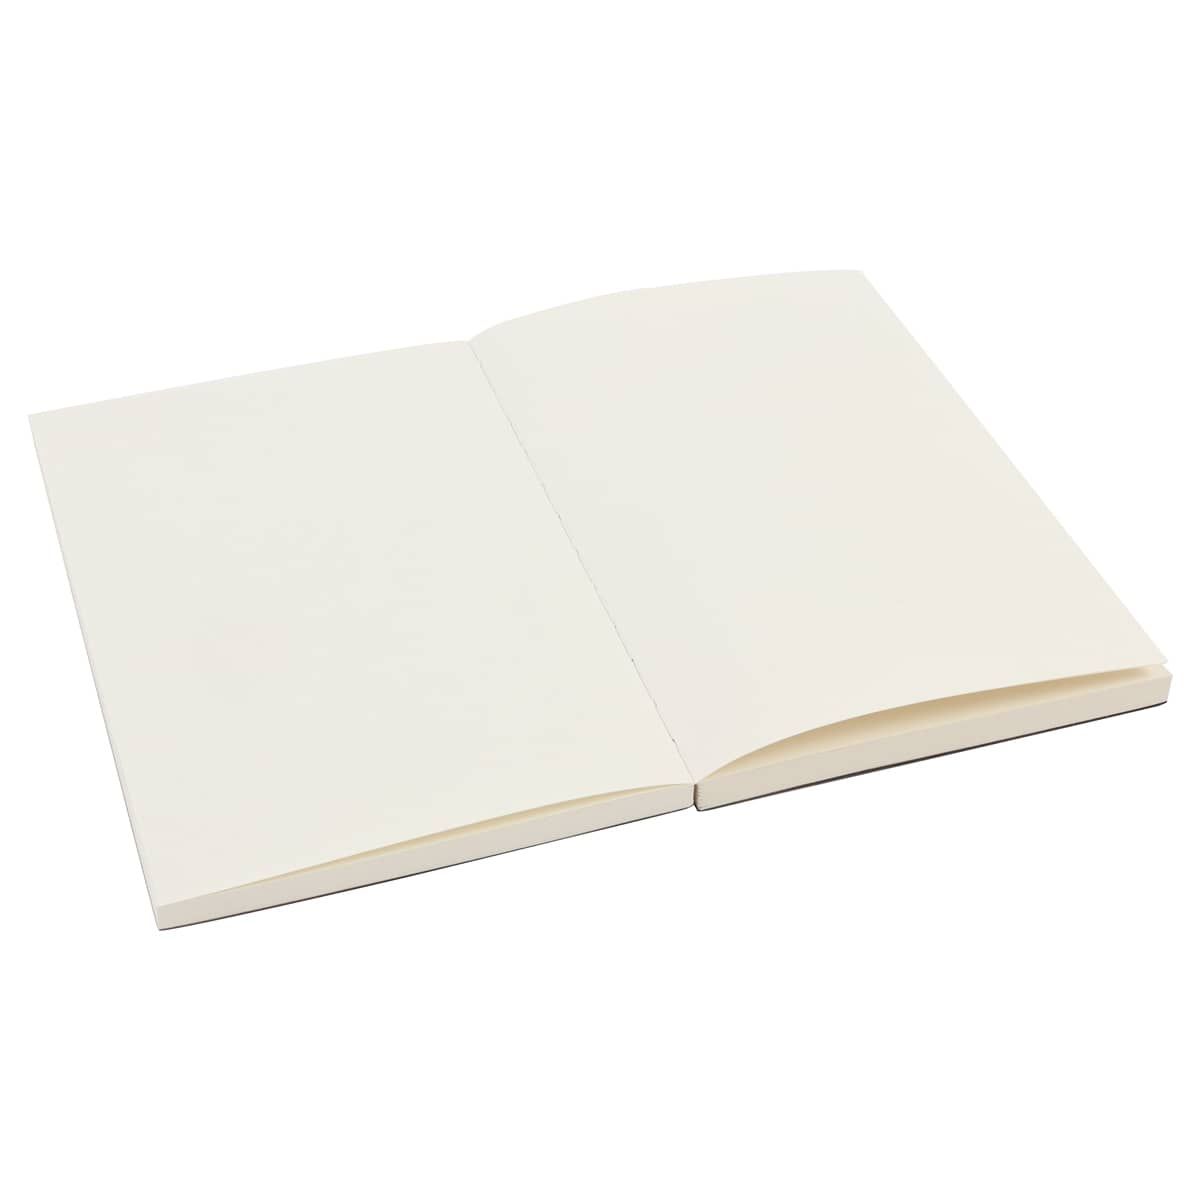 Open binding allows sketchbook to lay flat